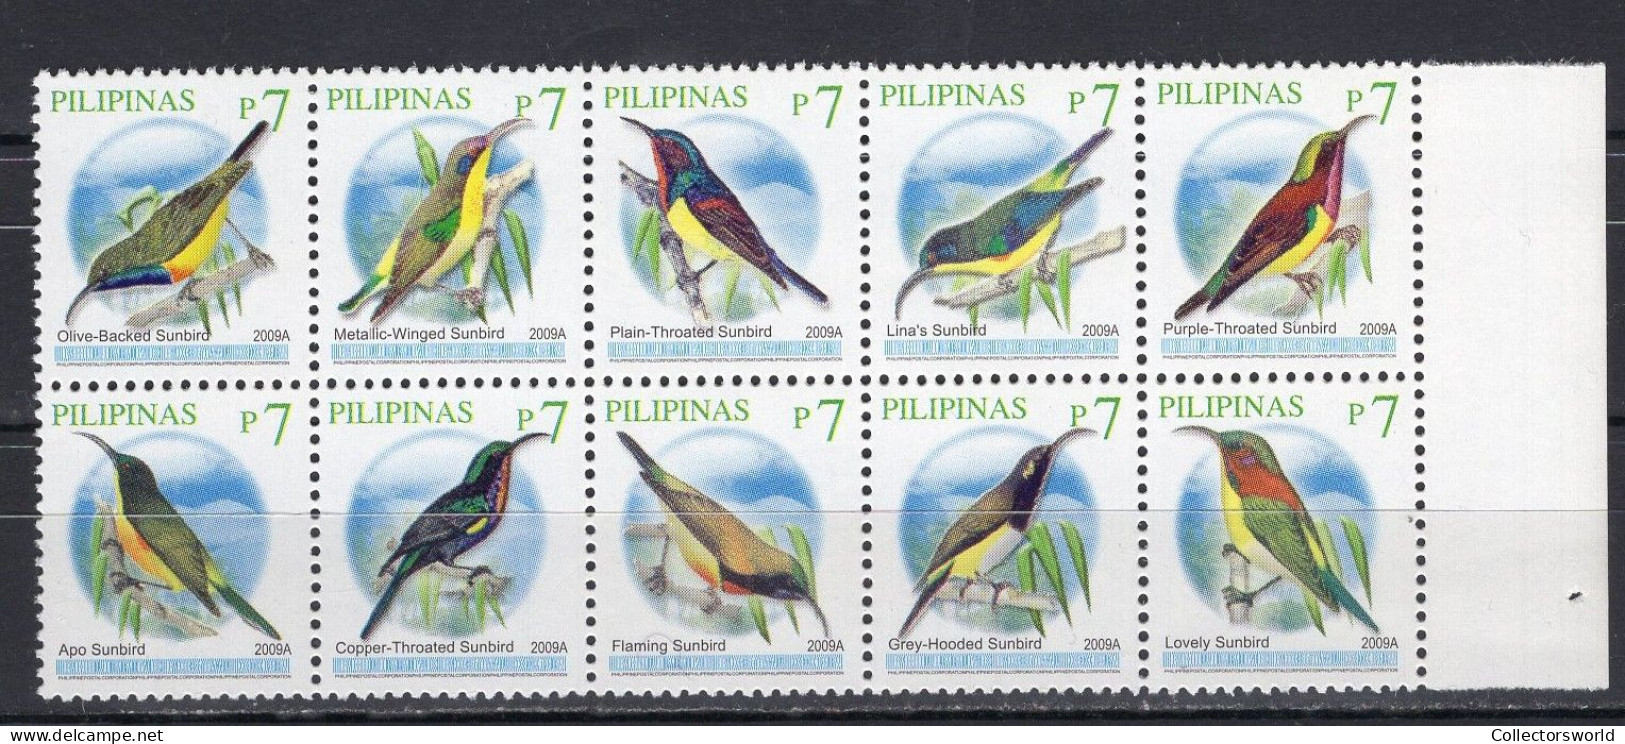 Philippines Serie 10v 2009 Year 2009A On Stamps - Birds Sunbirds MNH - Filipinas